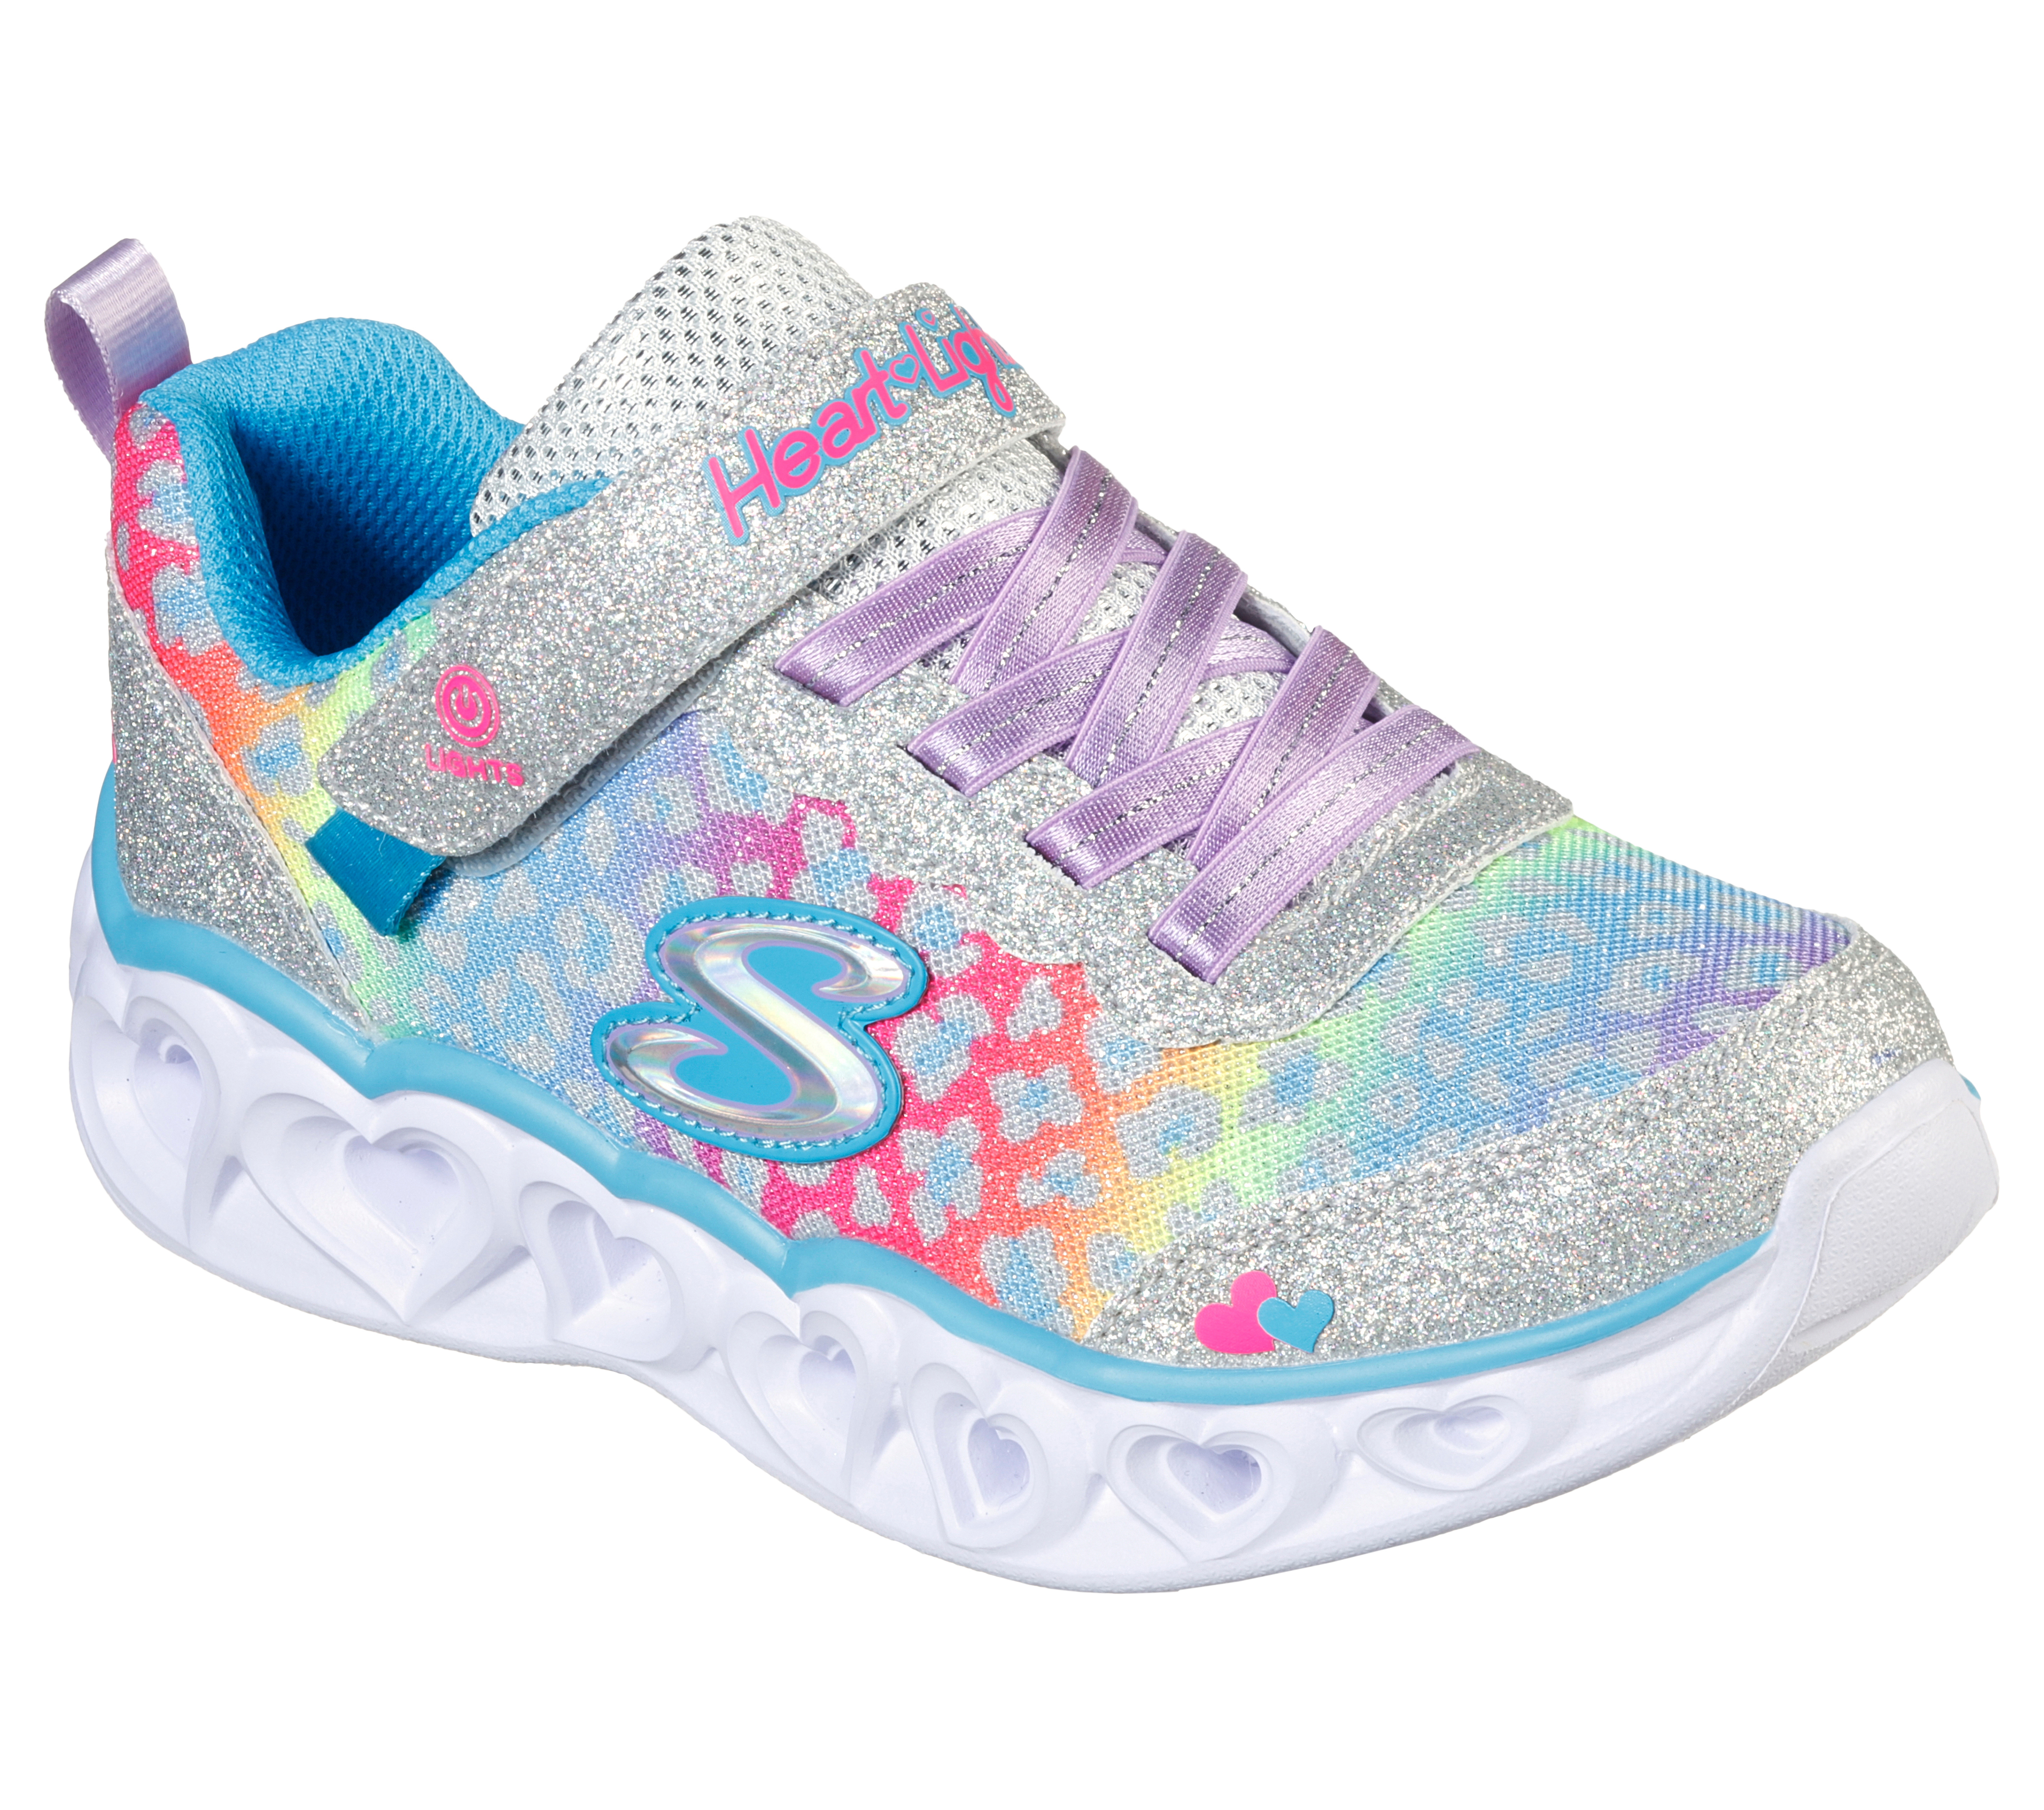 skechers light up shoes battery replacement